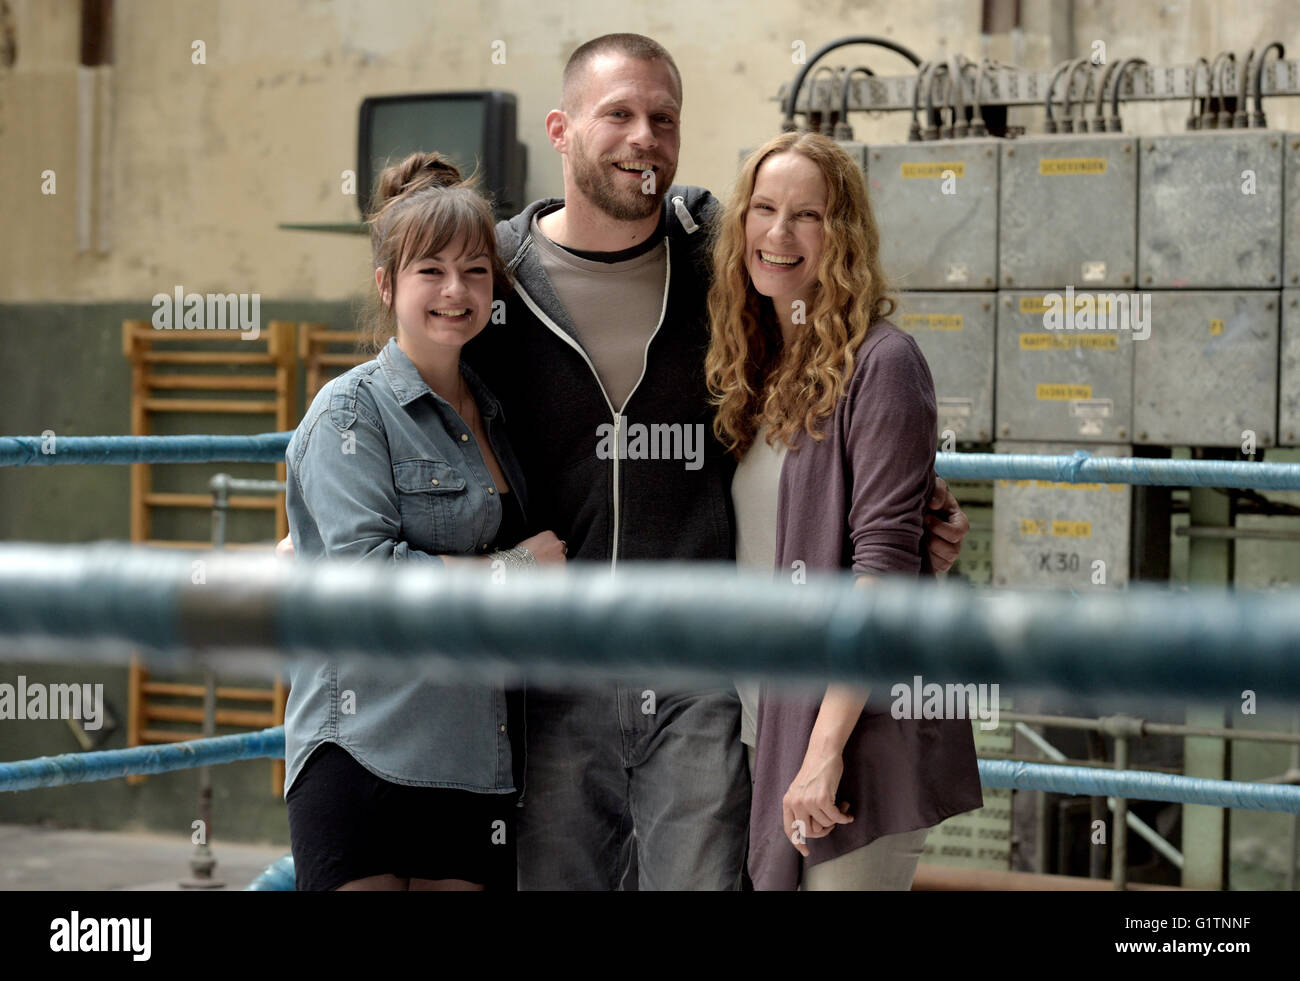 Berlin, Germany. 19th May, 2016. Actors Michelle Barthel (L-R, as Juni Tempel), Ken Duken (as Mark Tempel) and Chiara Schoras (as Sandra Tempel) stand on set during filming of the first self-produced drama series 'Tempel' from ZDFneo in the Rathenau Hallen in Berlin, Germany, 19 May 2016. Photo: RAINER JENSEN/dpa/Alamy Live News Stock Photo